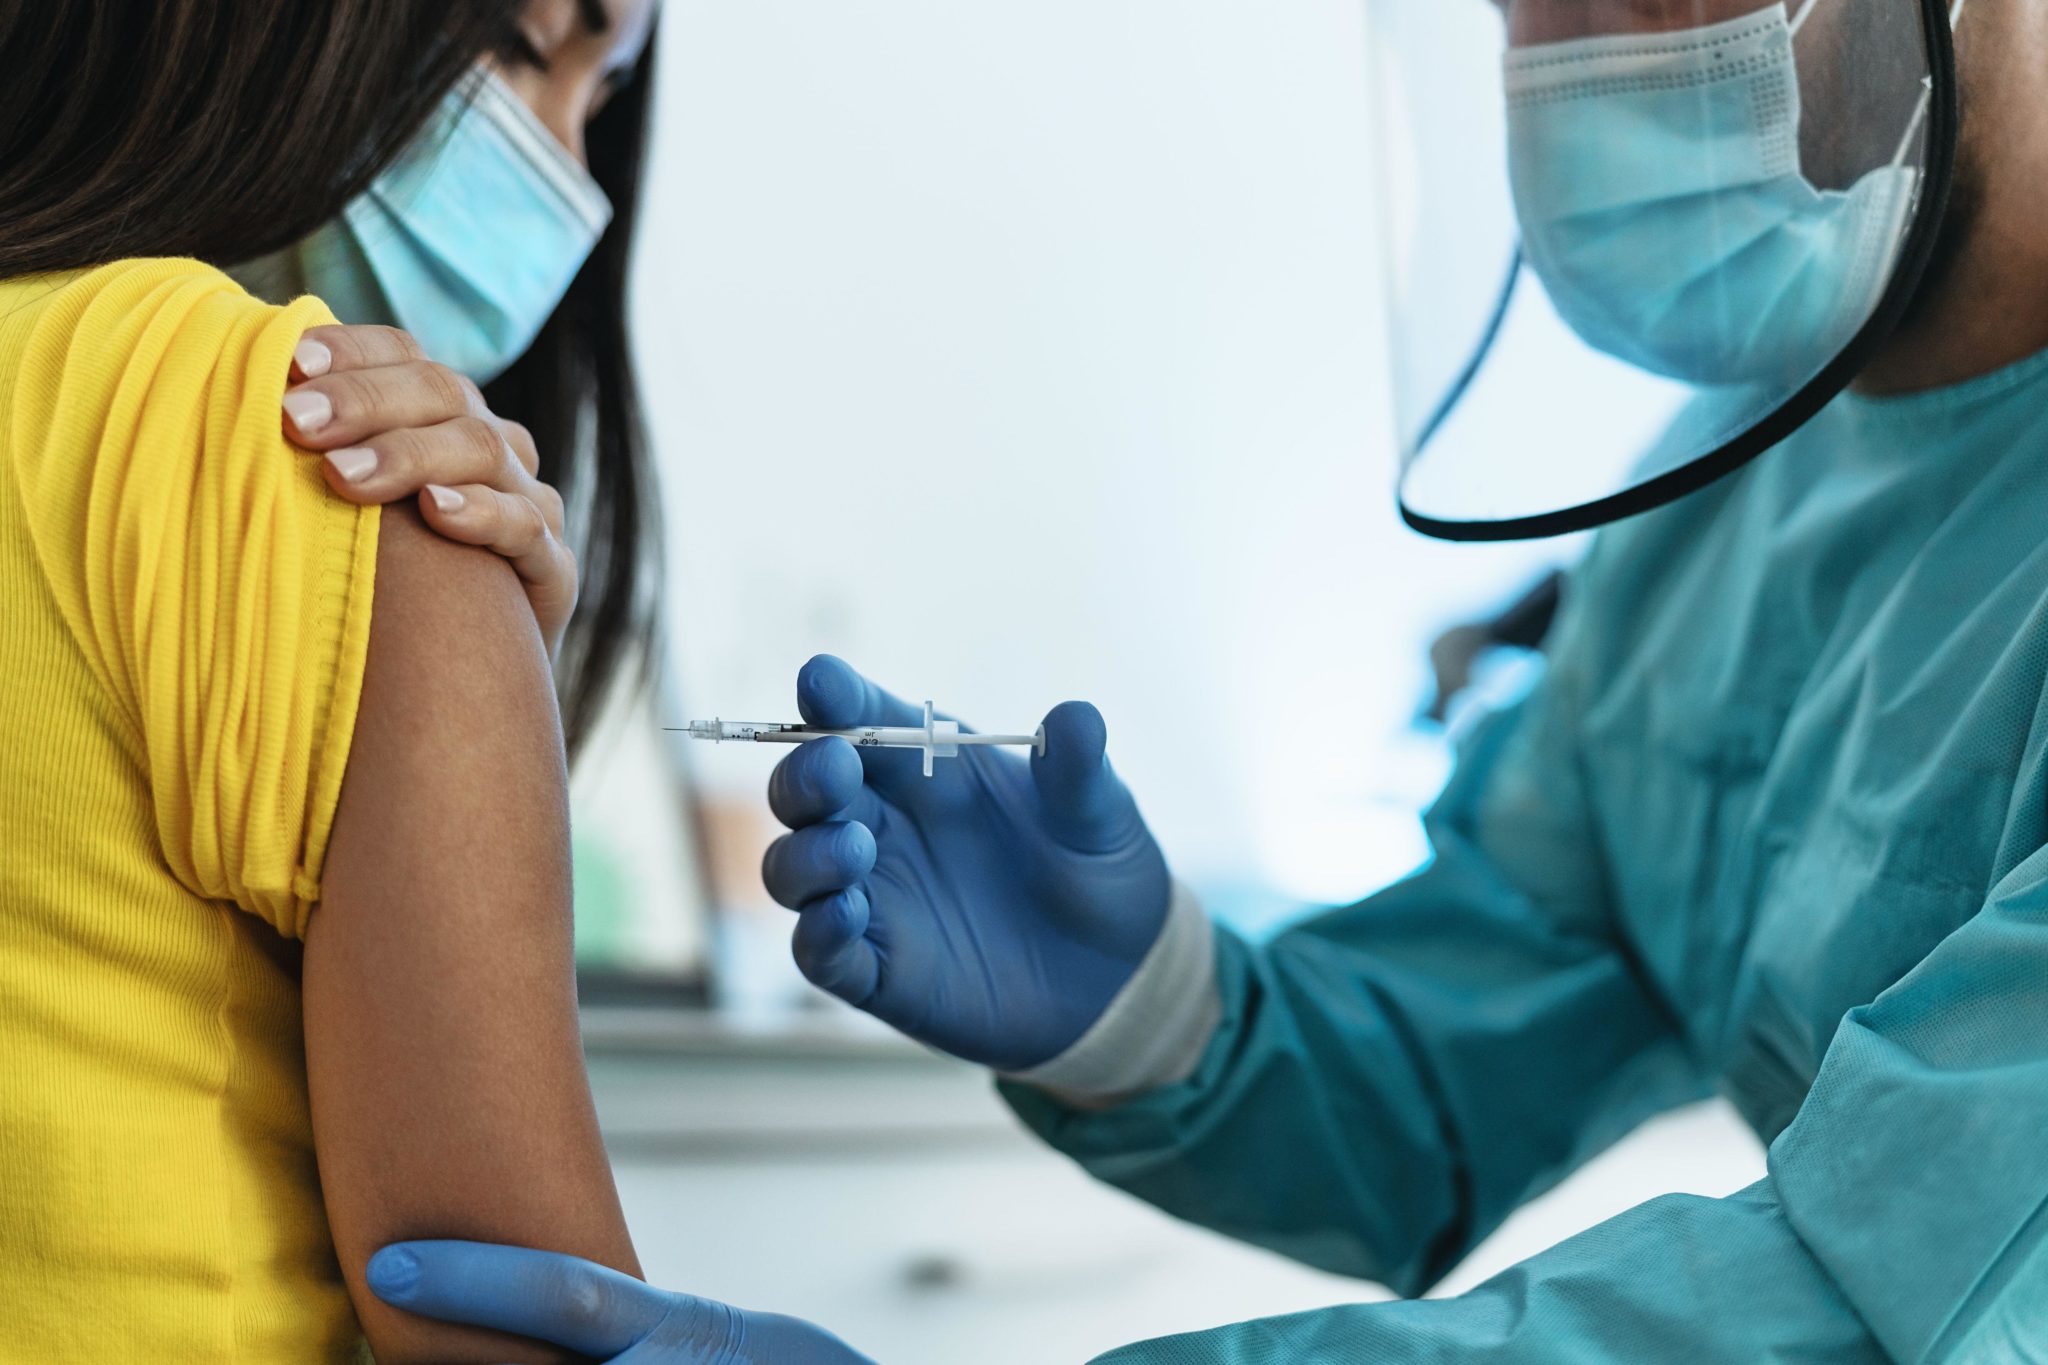 A medical worker giving a vaccine injection to a female patient for preventing coronavirus in Tenerife, Spain in January 2021